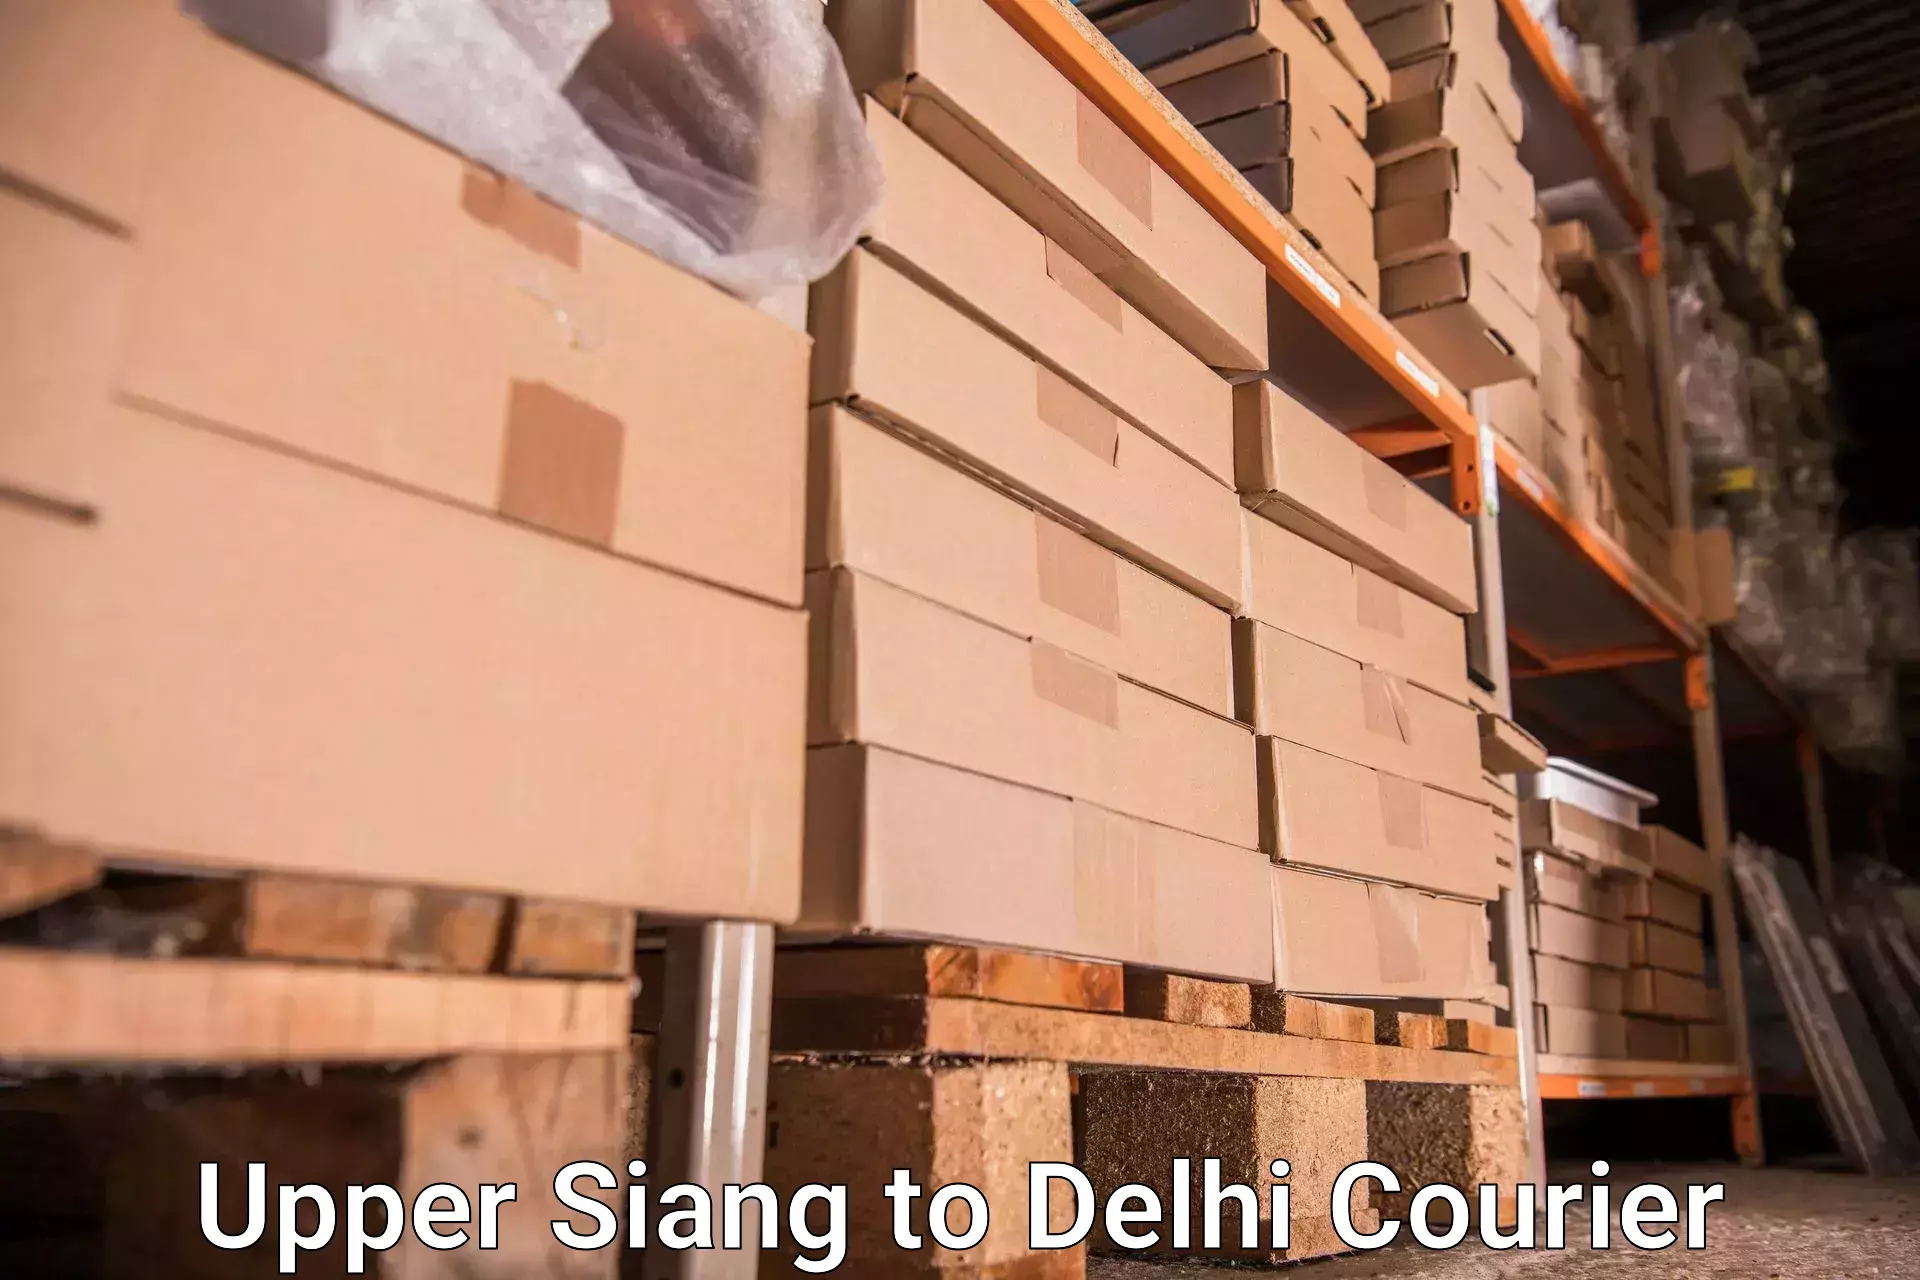 Luggage shipment specialists Upper Siang to Delhi